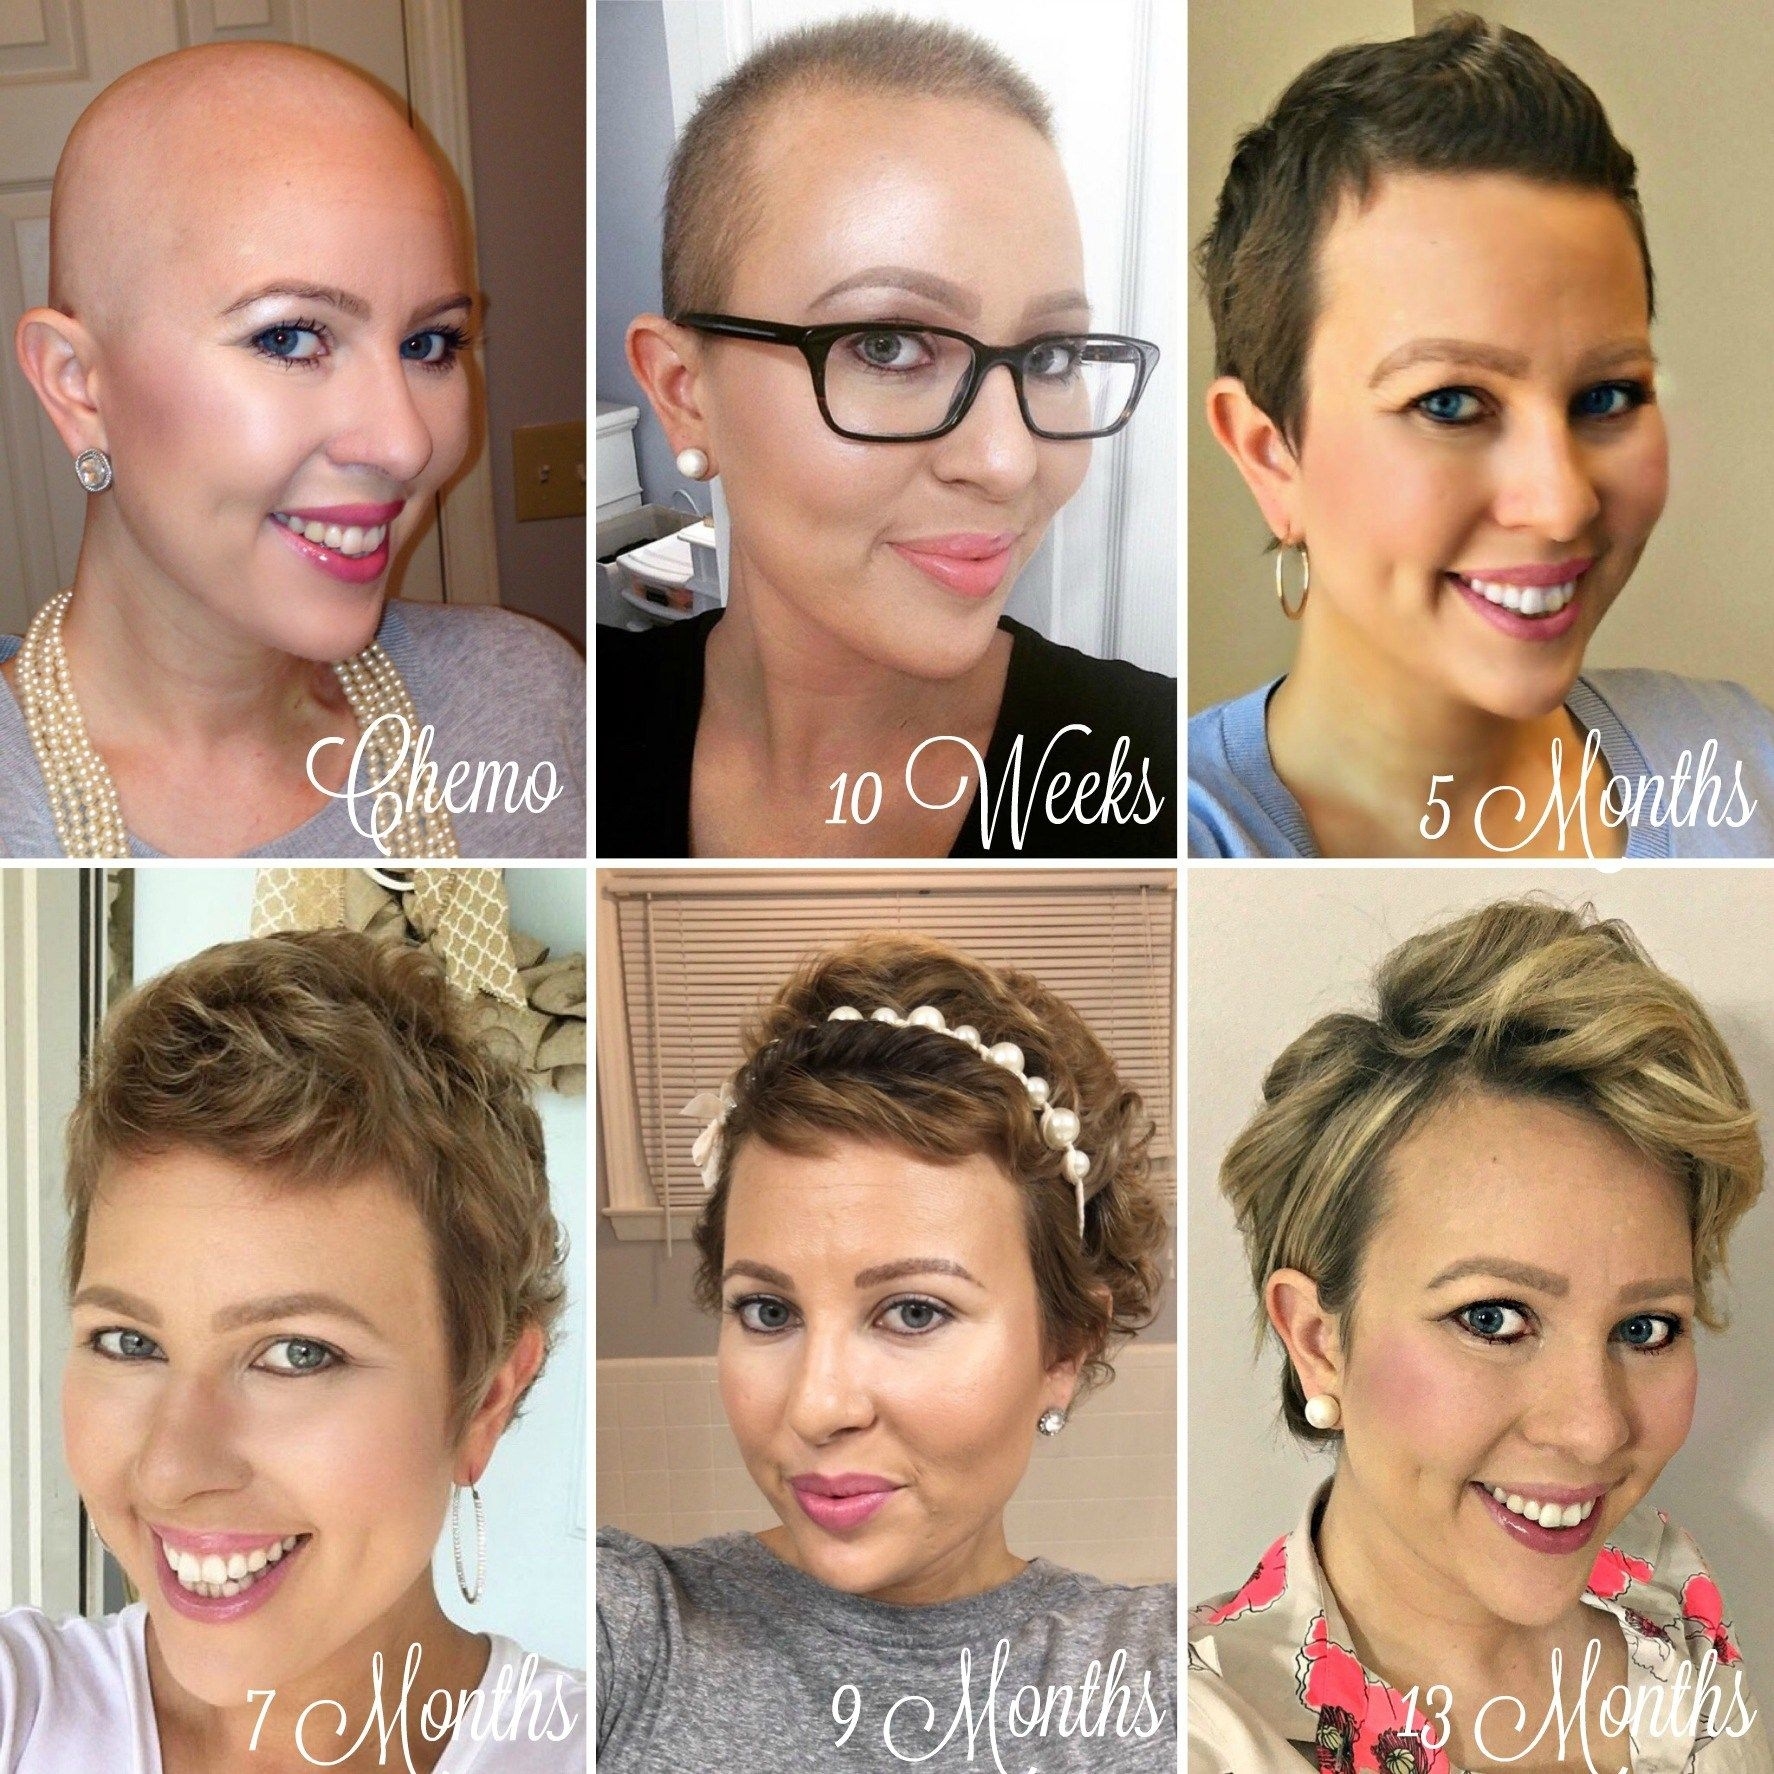 Chemo Regrowth: How To Style Your Short Hair | Hair Regrowth within Short Hairstyles For Cancer Patients